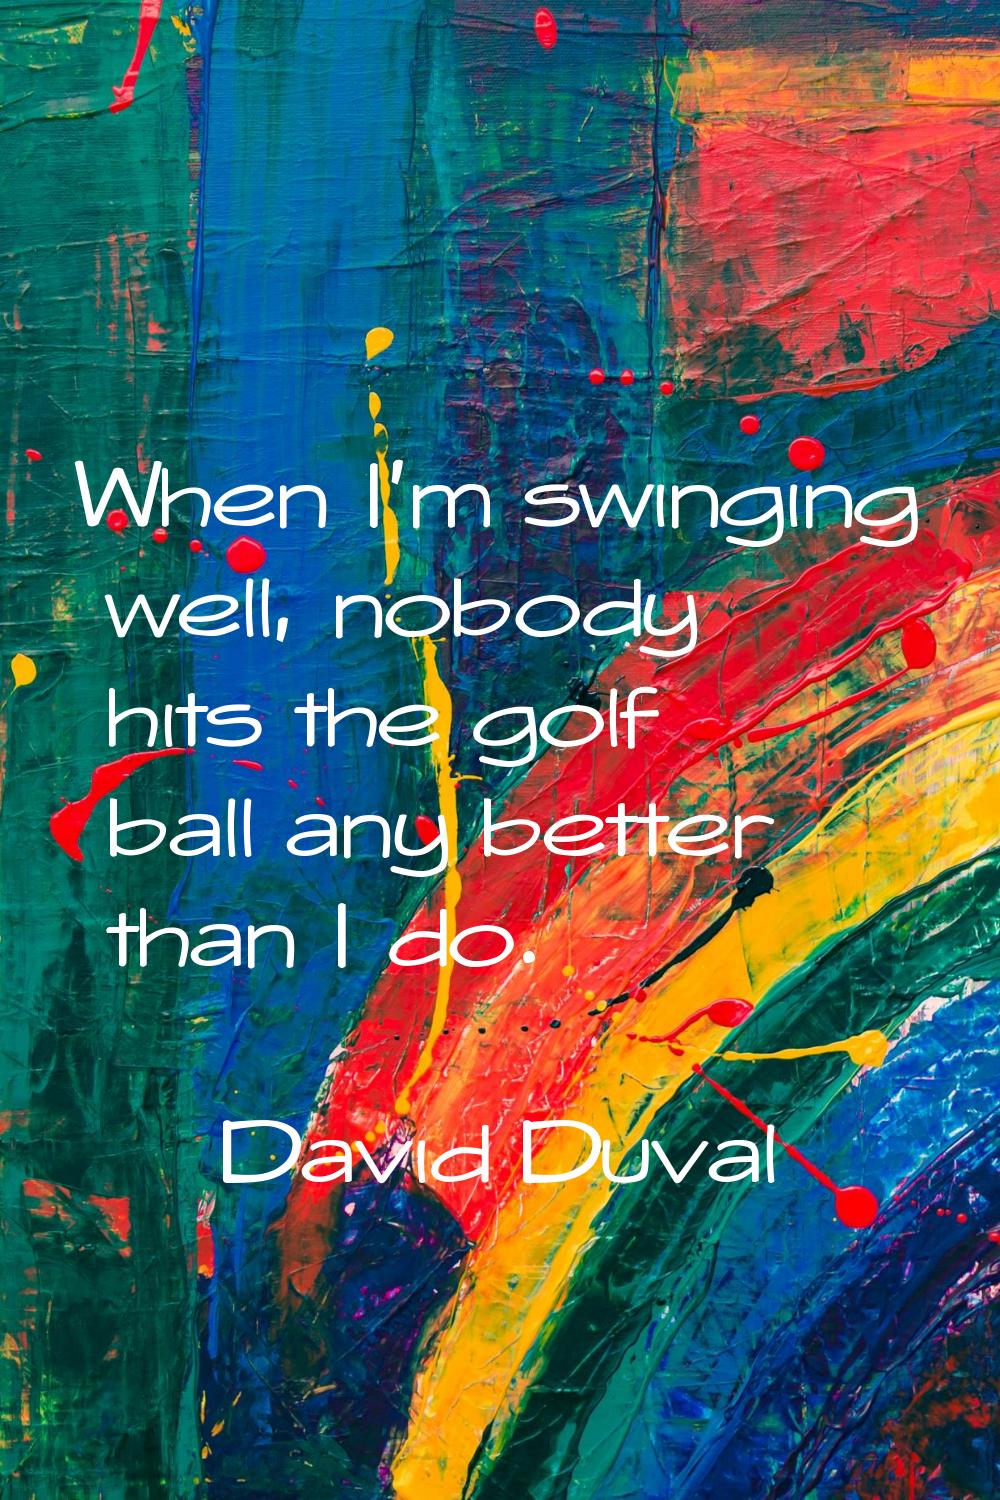 When I'm swinging well, nobody hits the golf ball any better than I do.